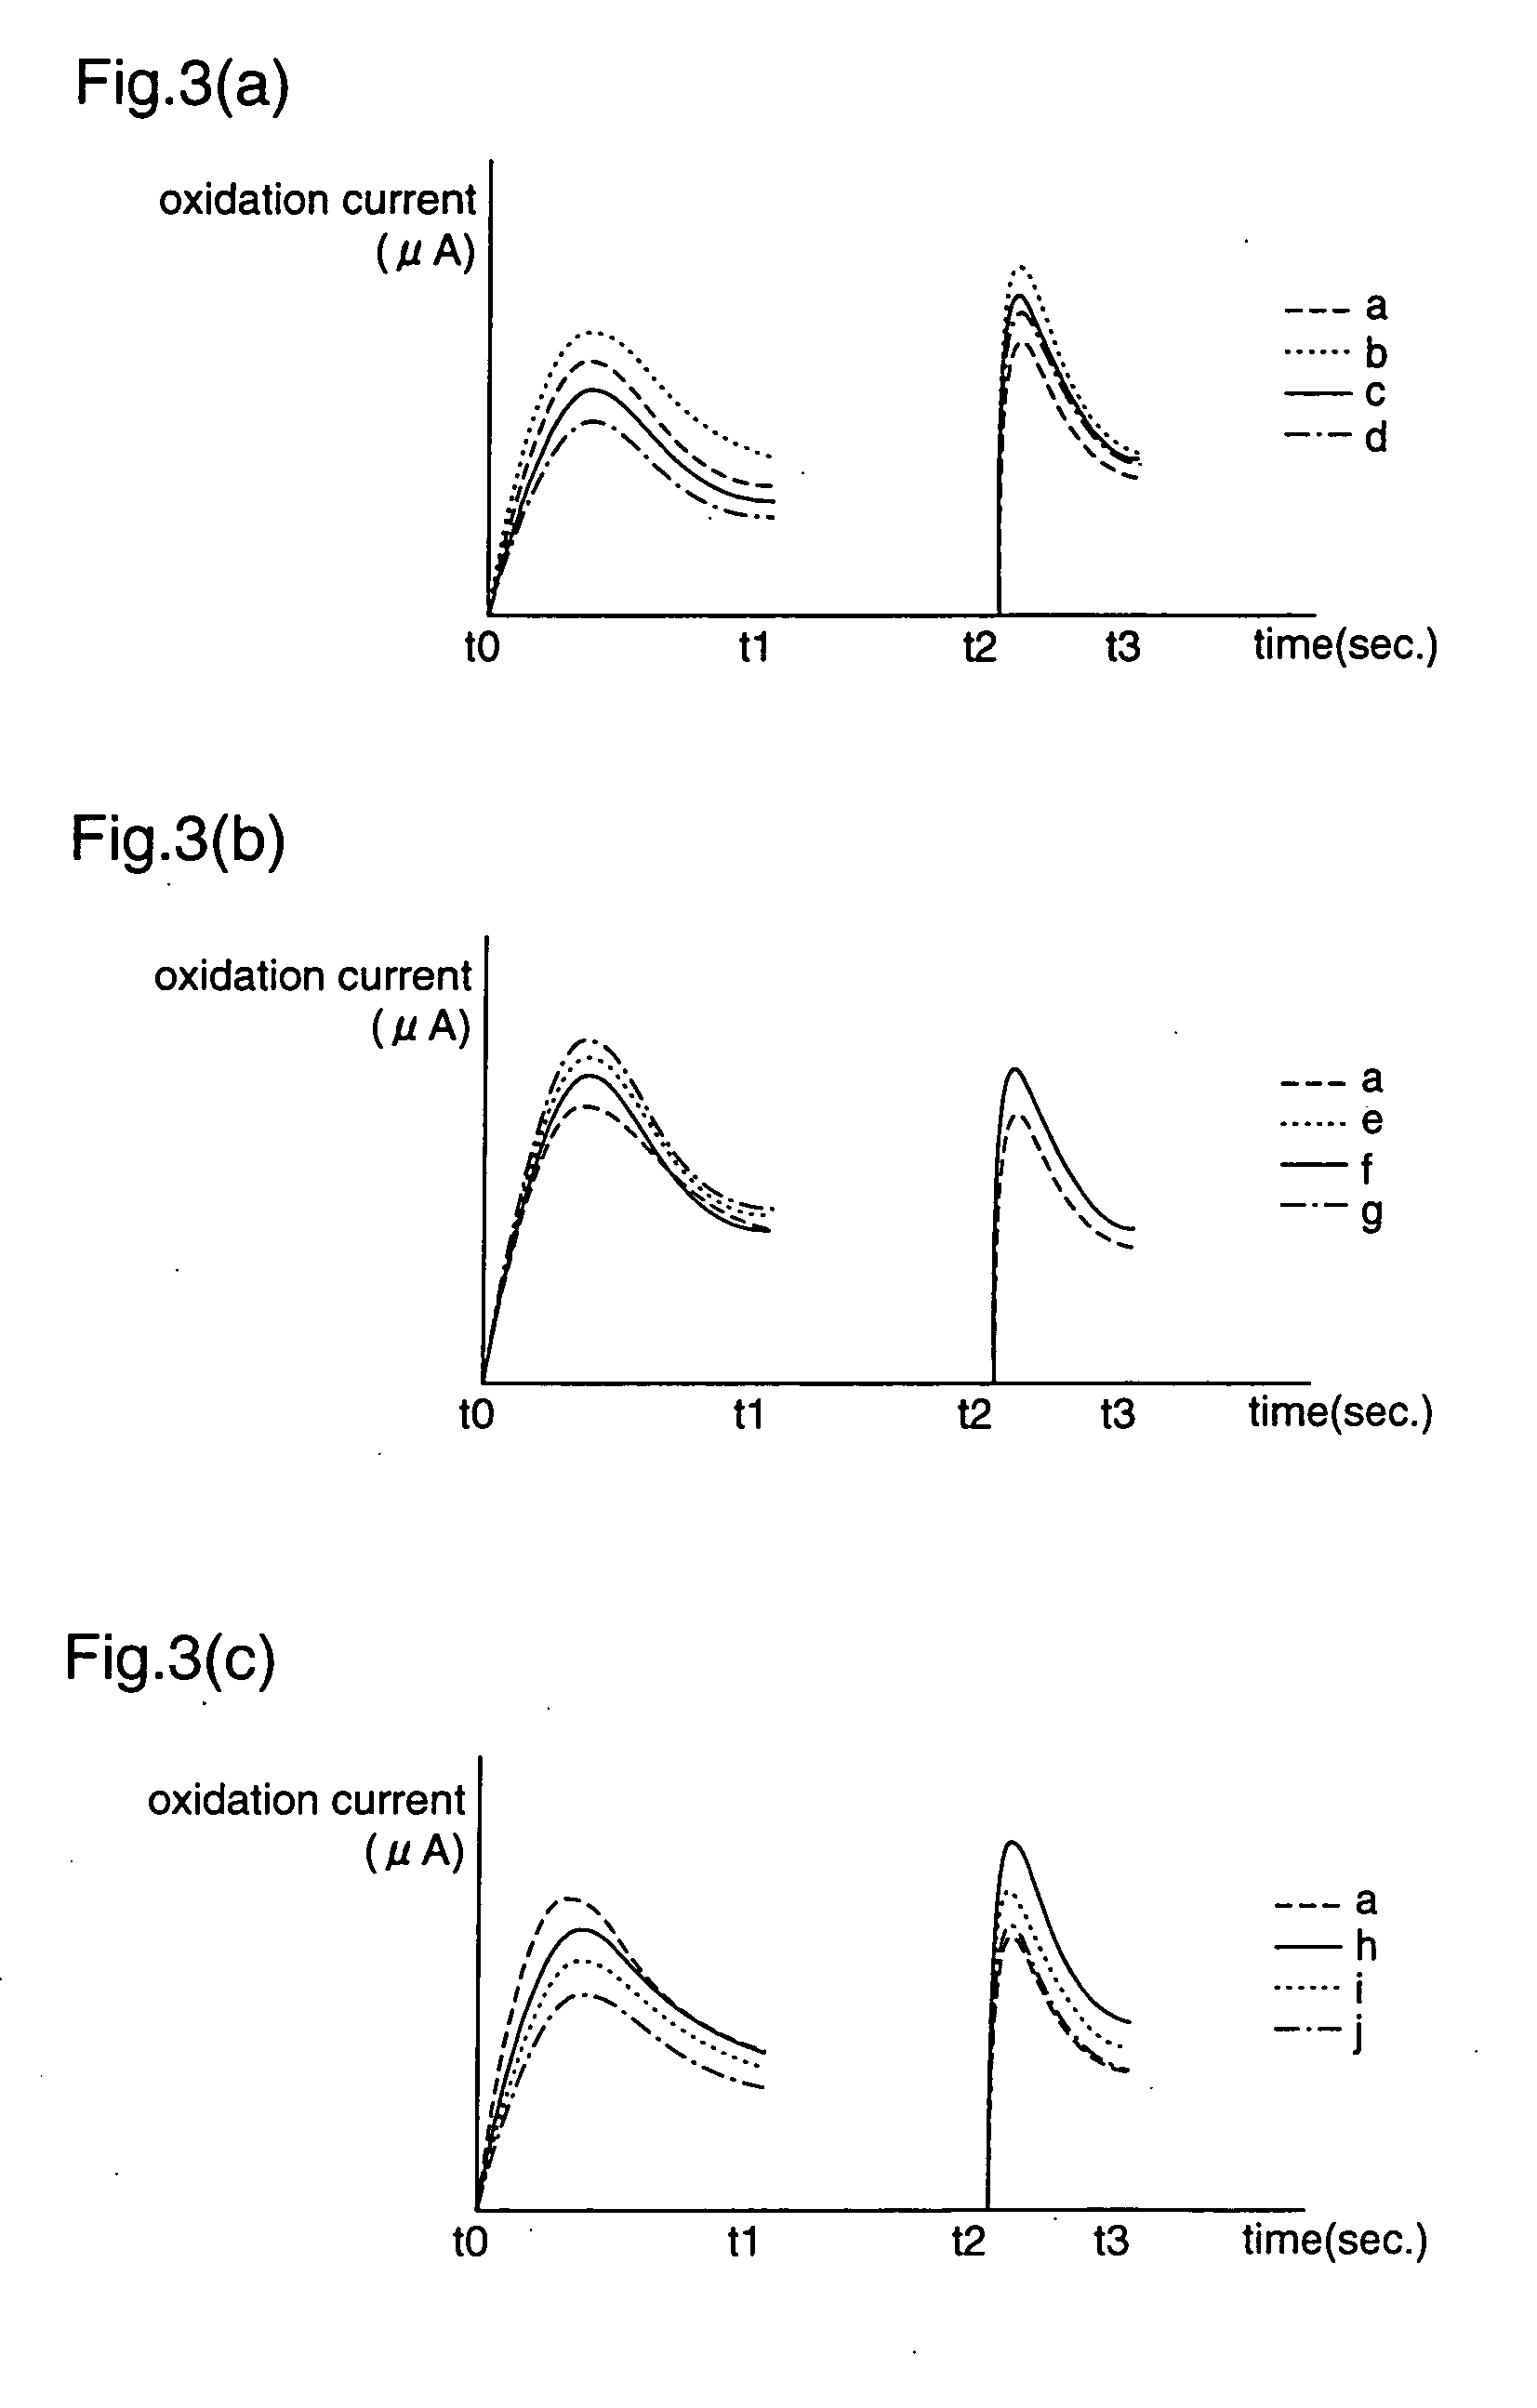 Determination method for automatically identifying analyte liquid and standard solution for biosensor